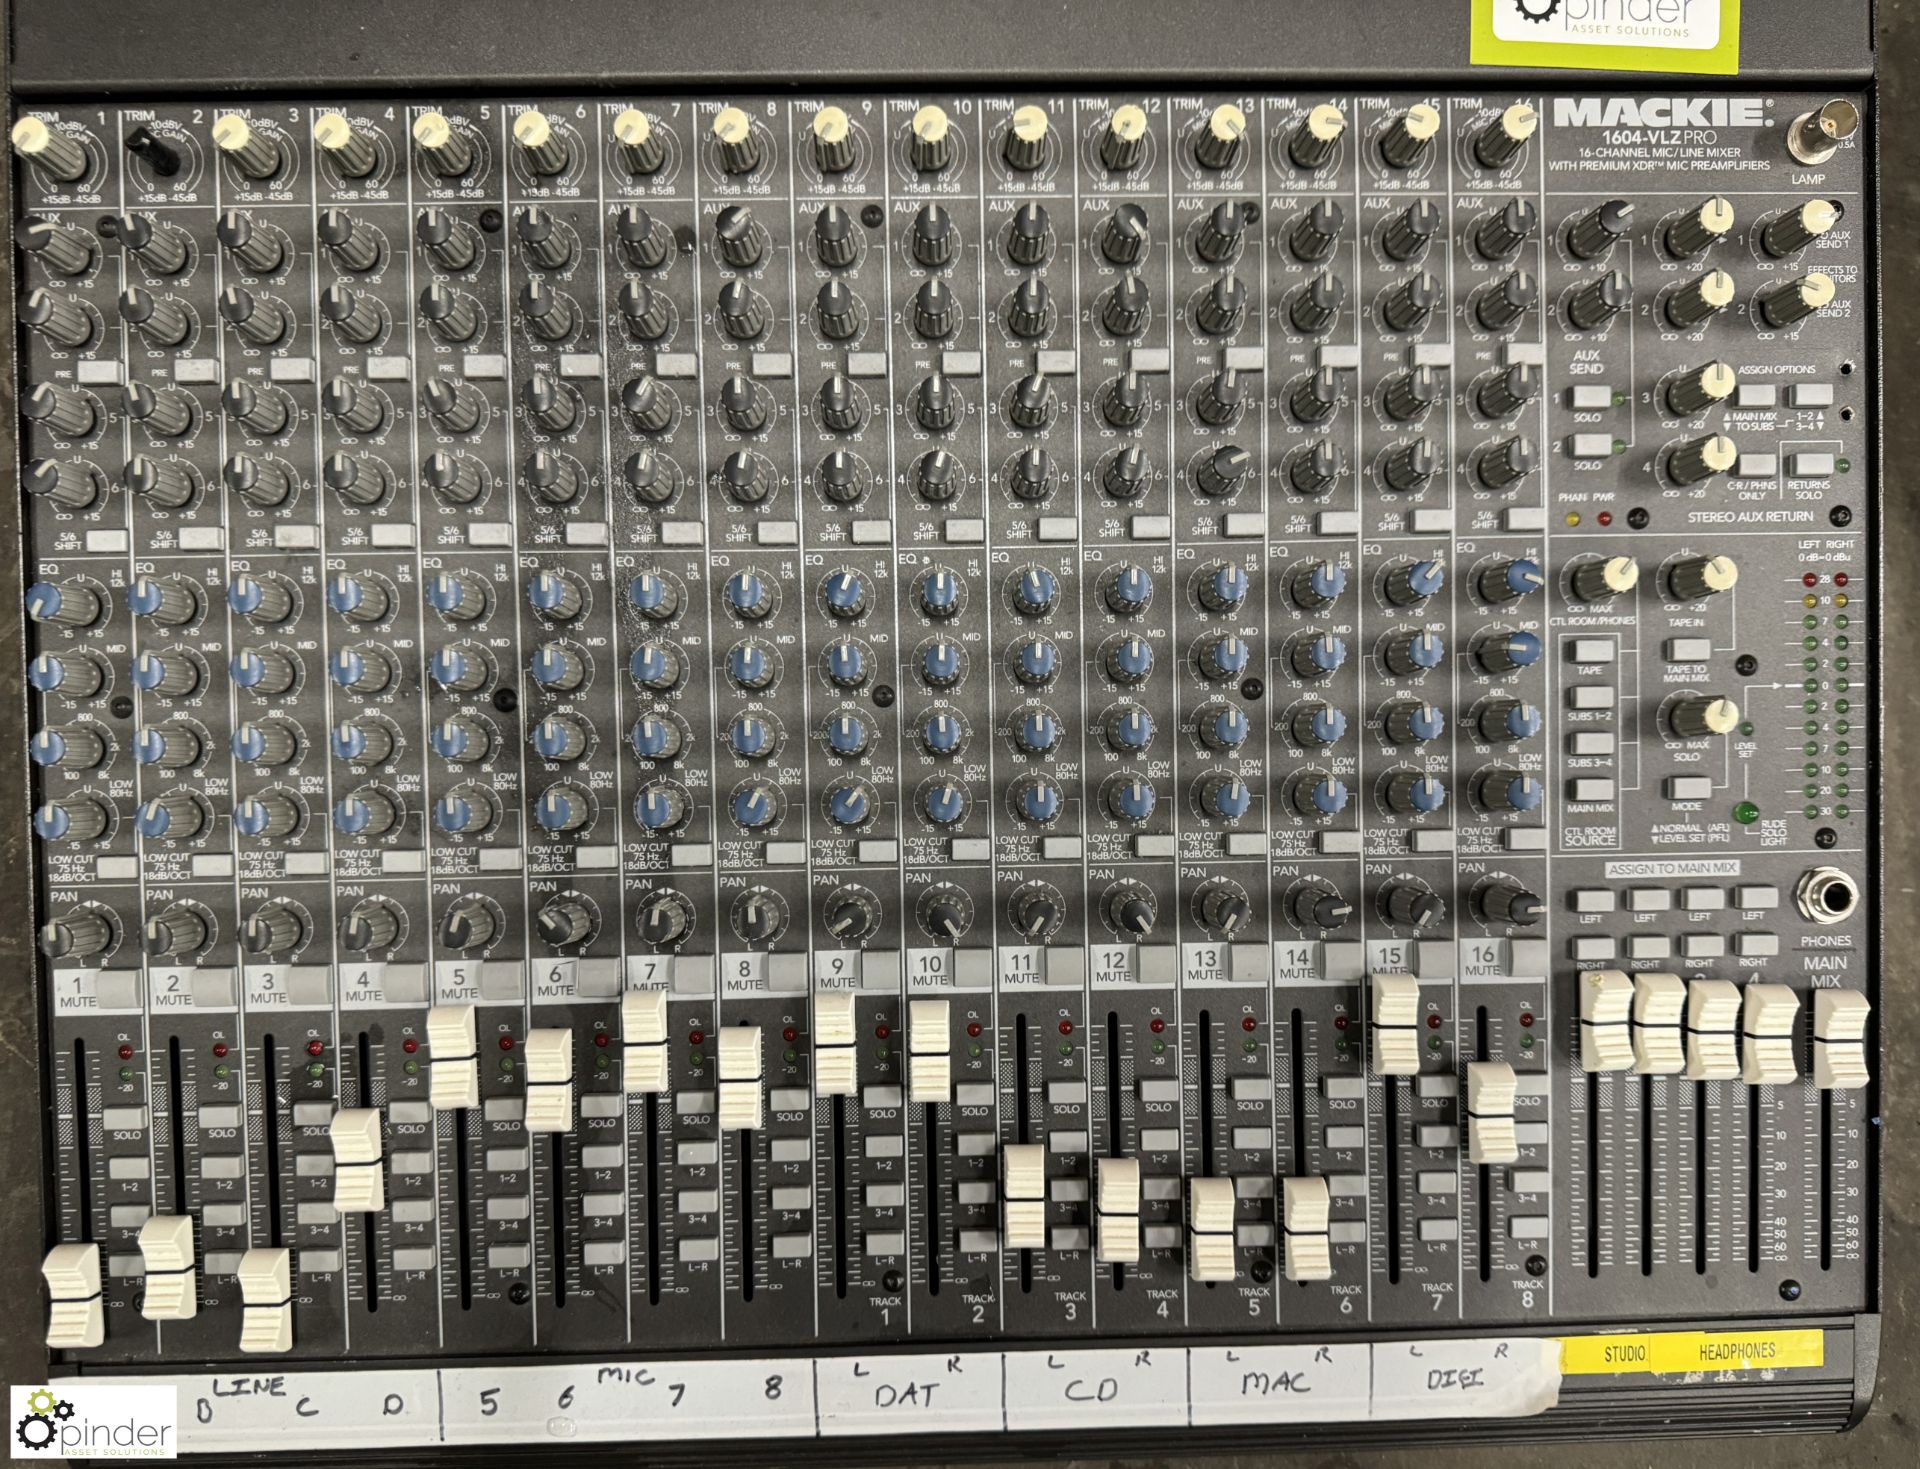 Mackie 1604-VLZ PRO 16-channel Mixer - Image 3 of 4